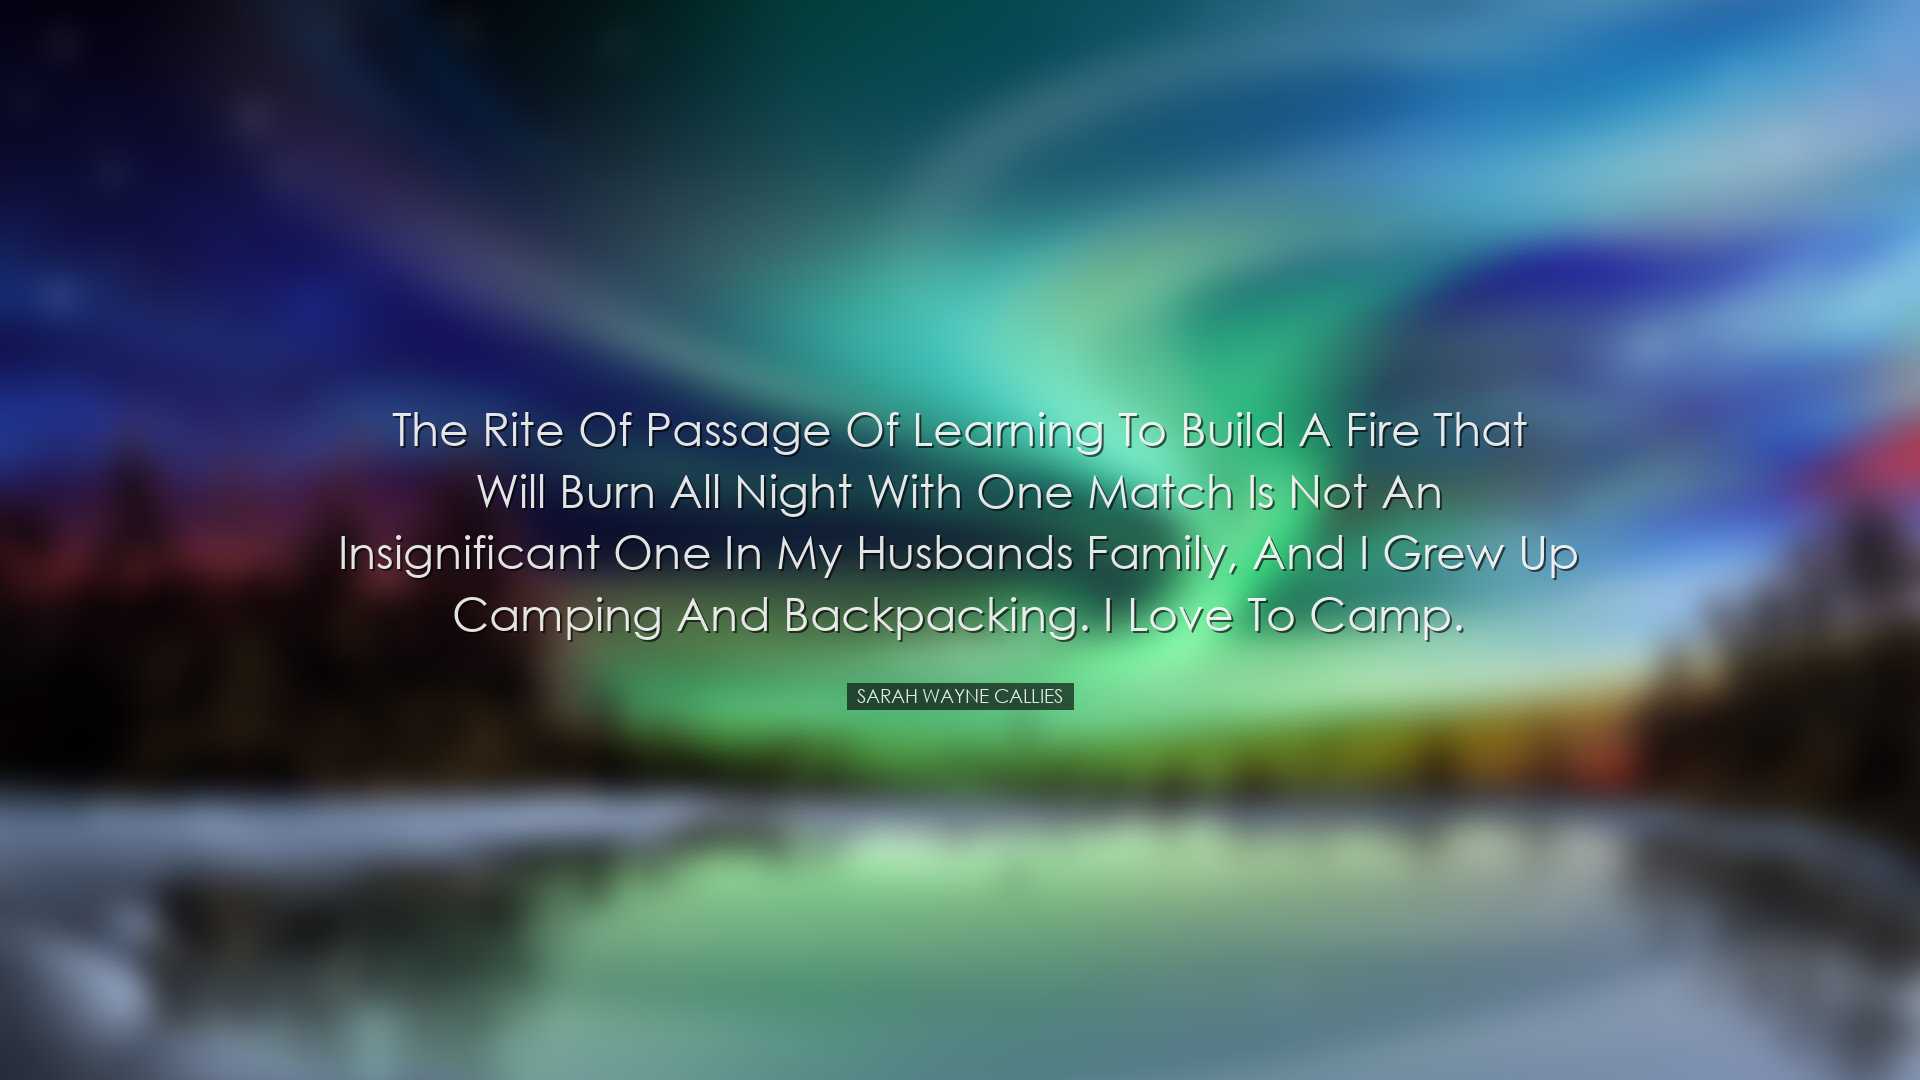 The rite of passage of learning to build a fire that will burn all